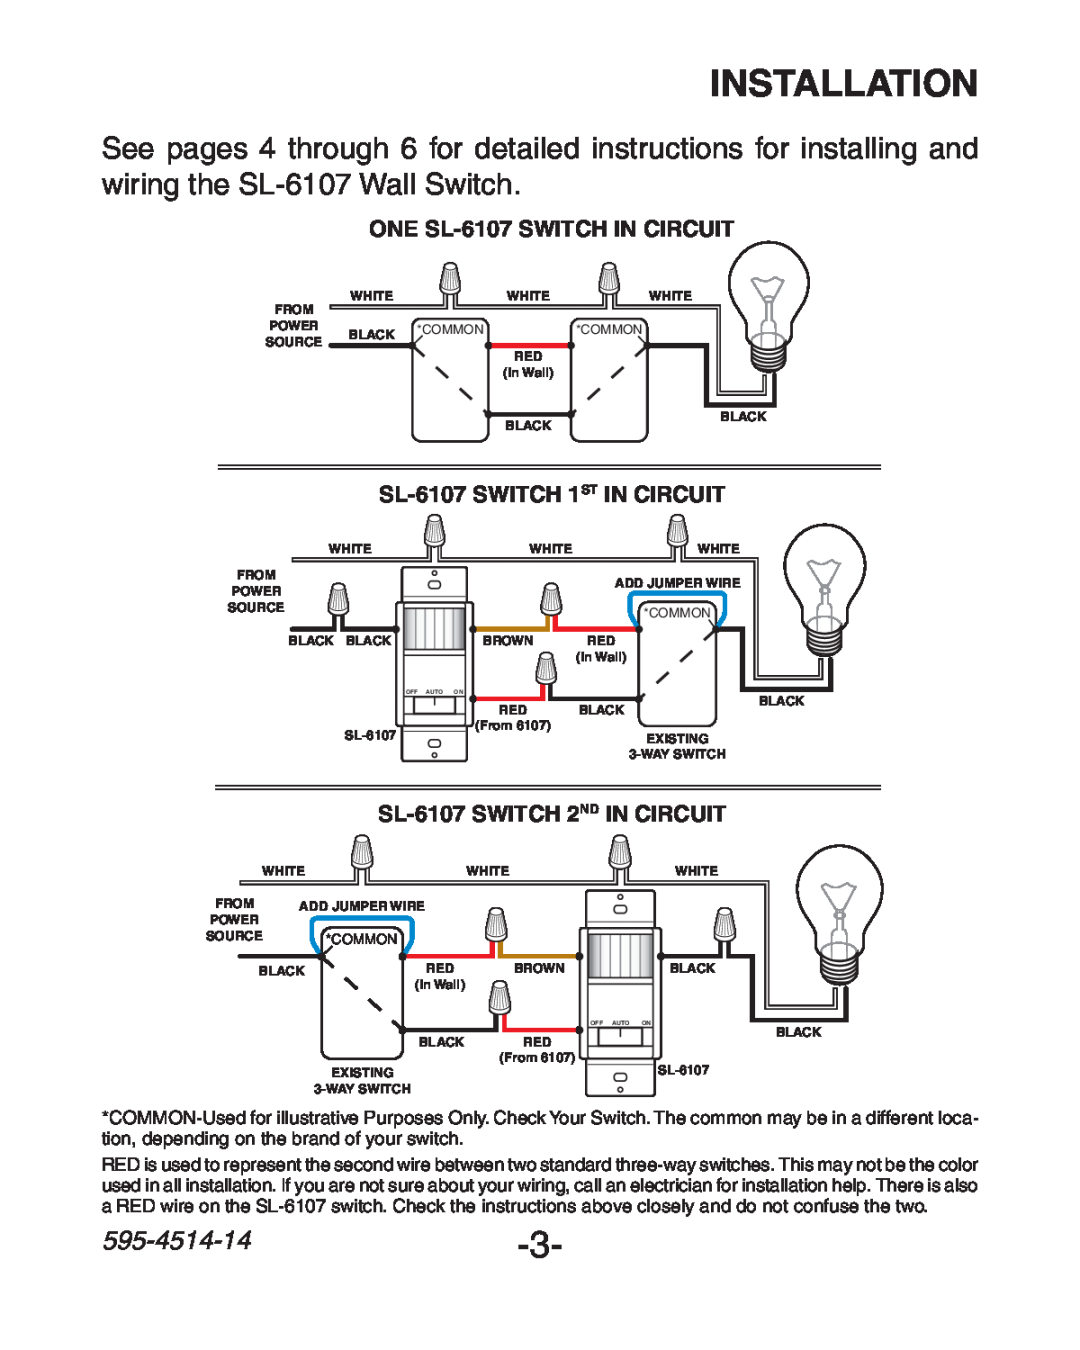 Heath Zenith manual Installation, 595-4514-14, ONE SL-6107SWITCH IN CIRCUIT, SL-6107SWITCH 1ST IN CIRCUIT 